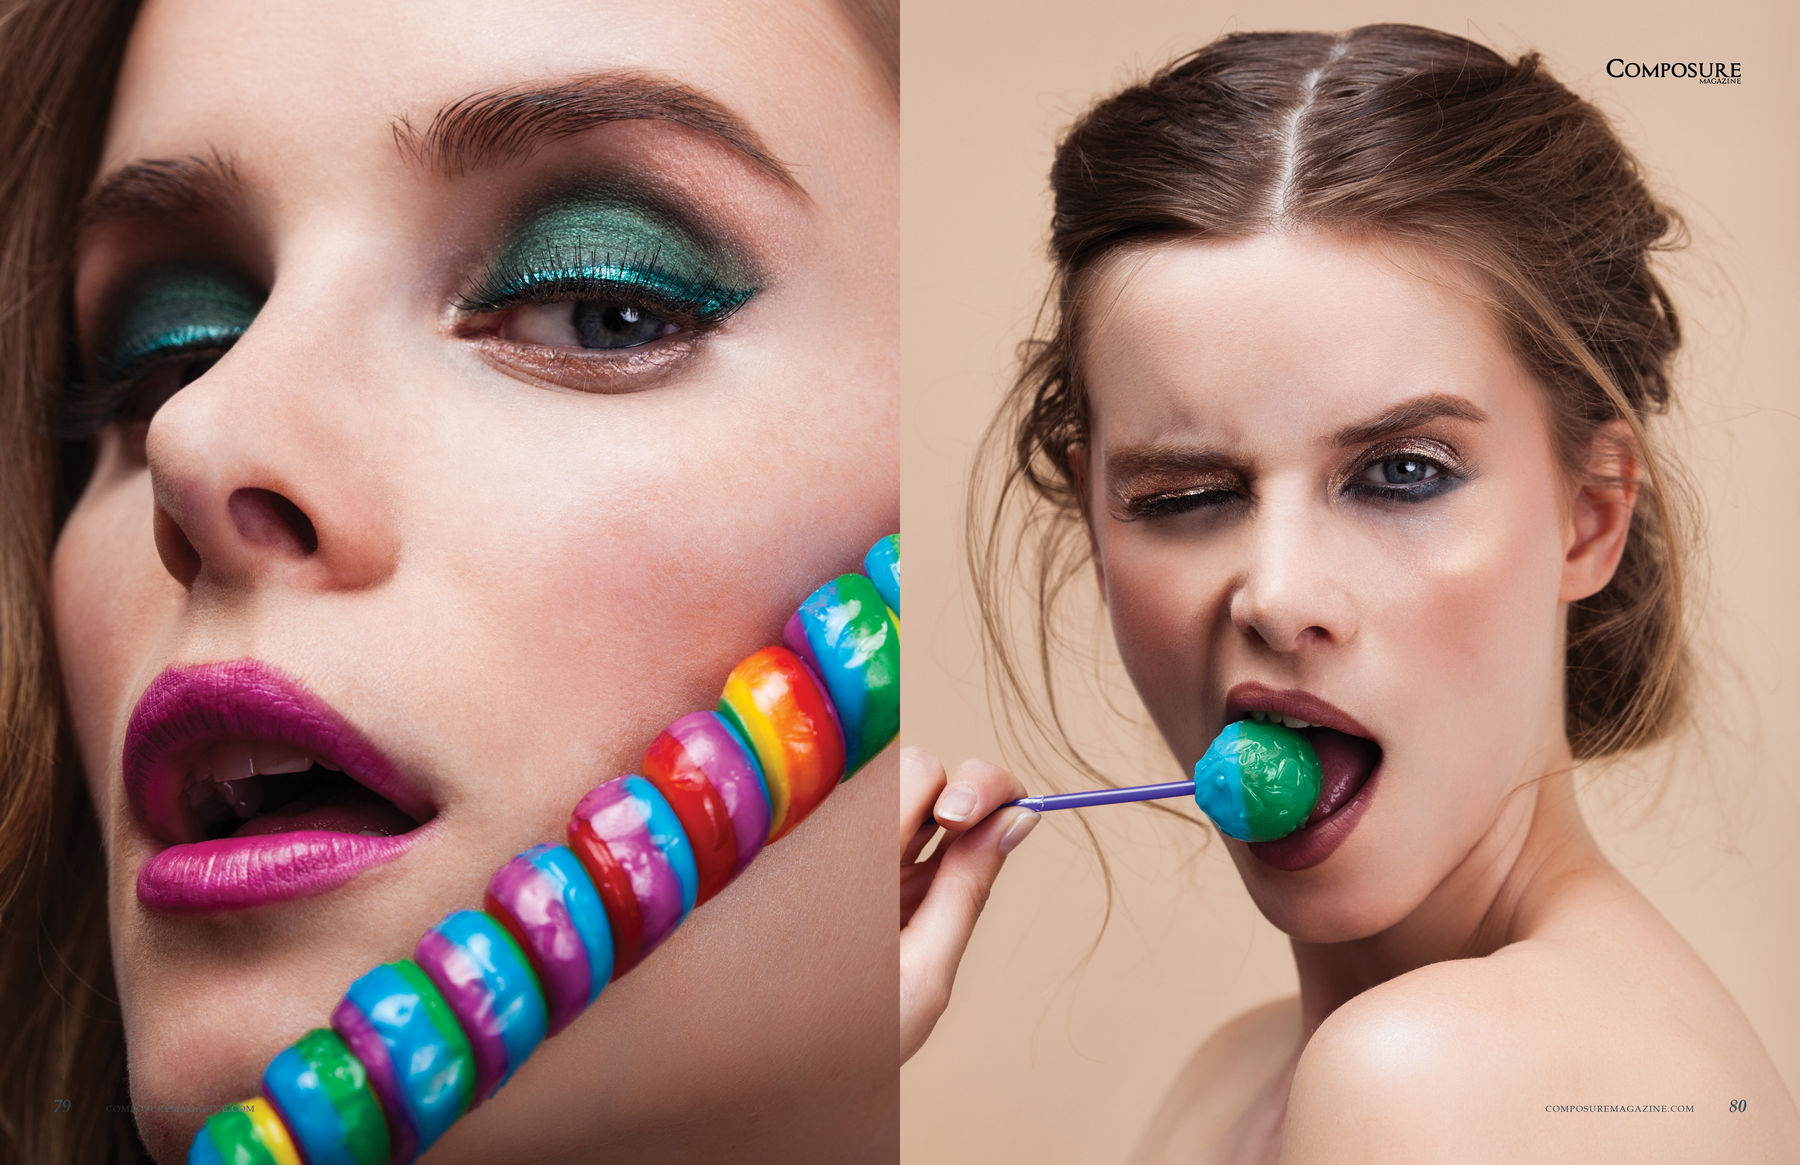 Beauty Editorial "Candy Crush" by John and Jane Hong